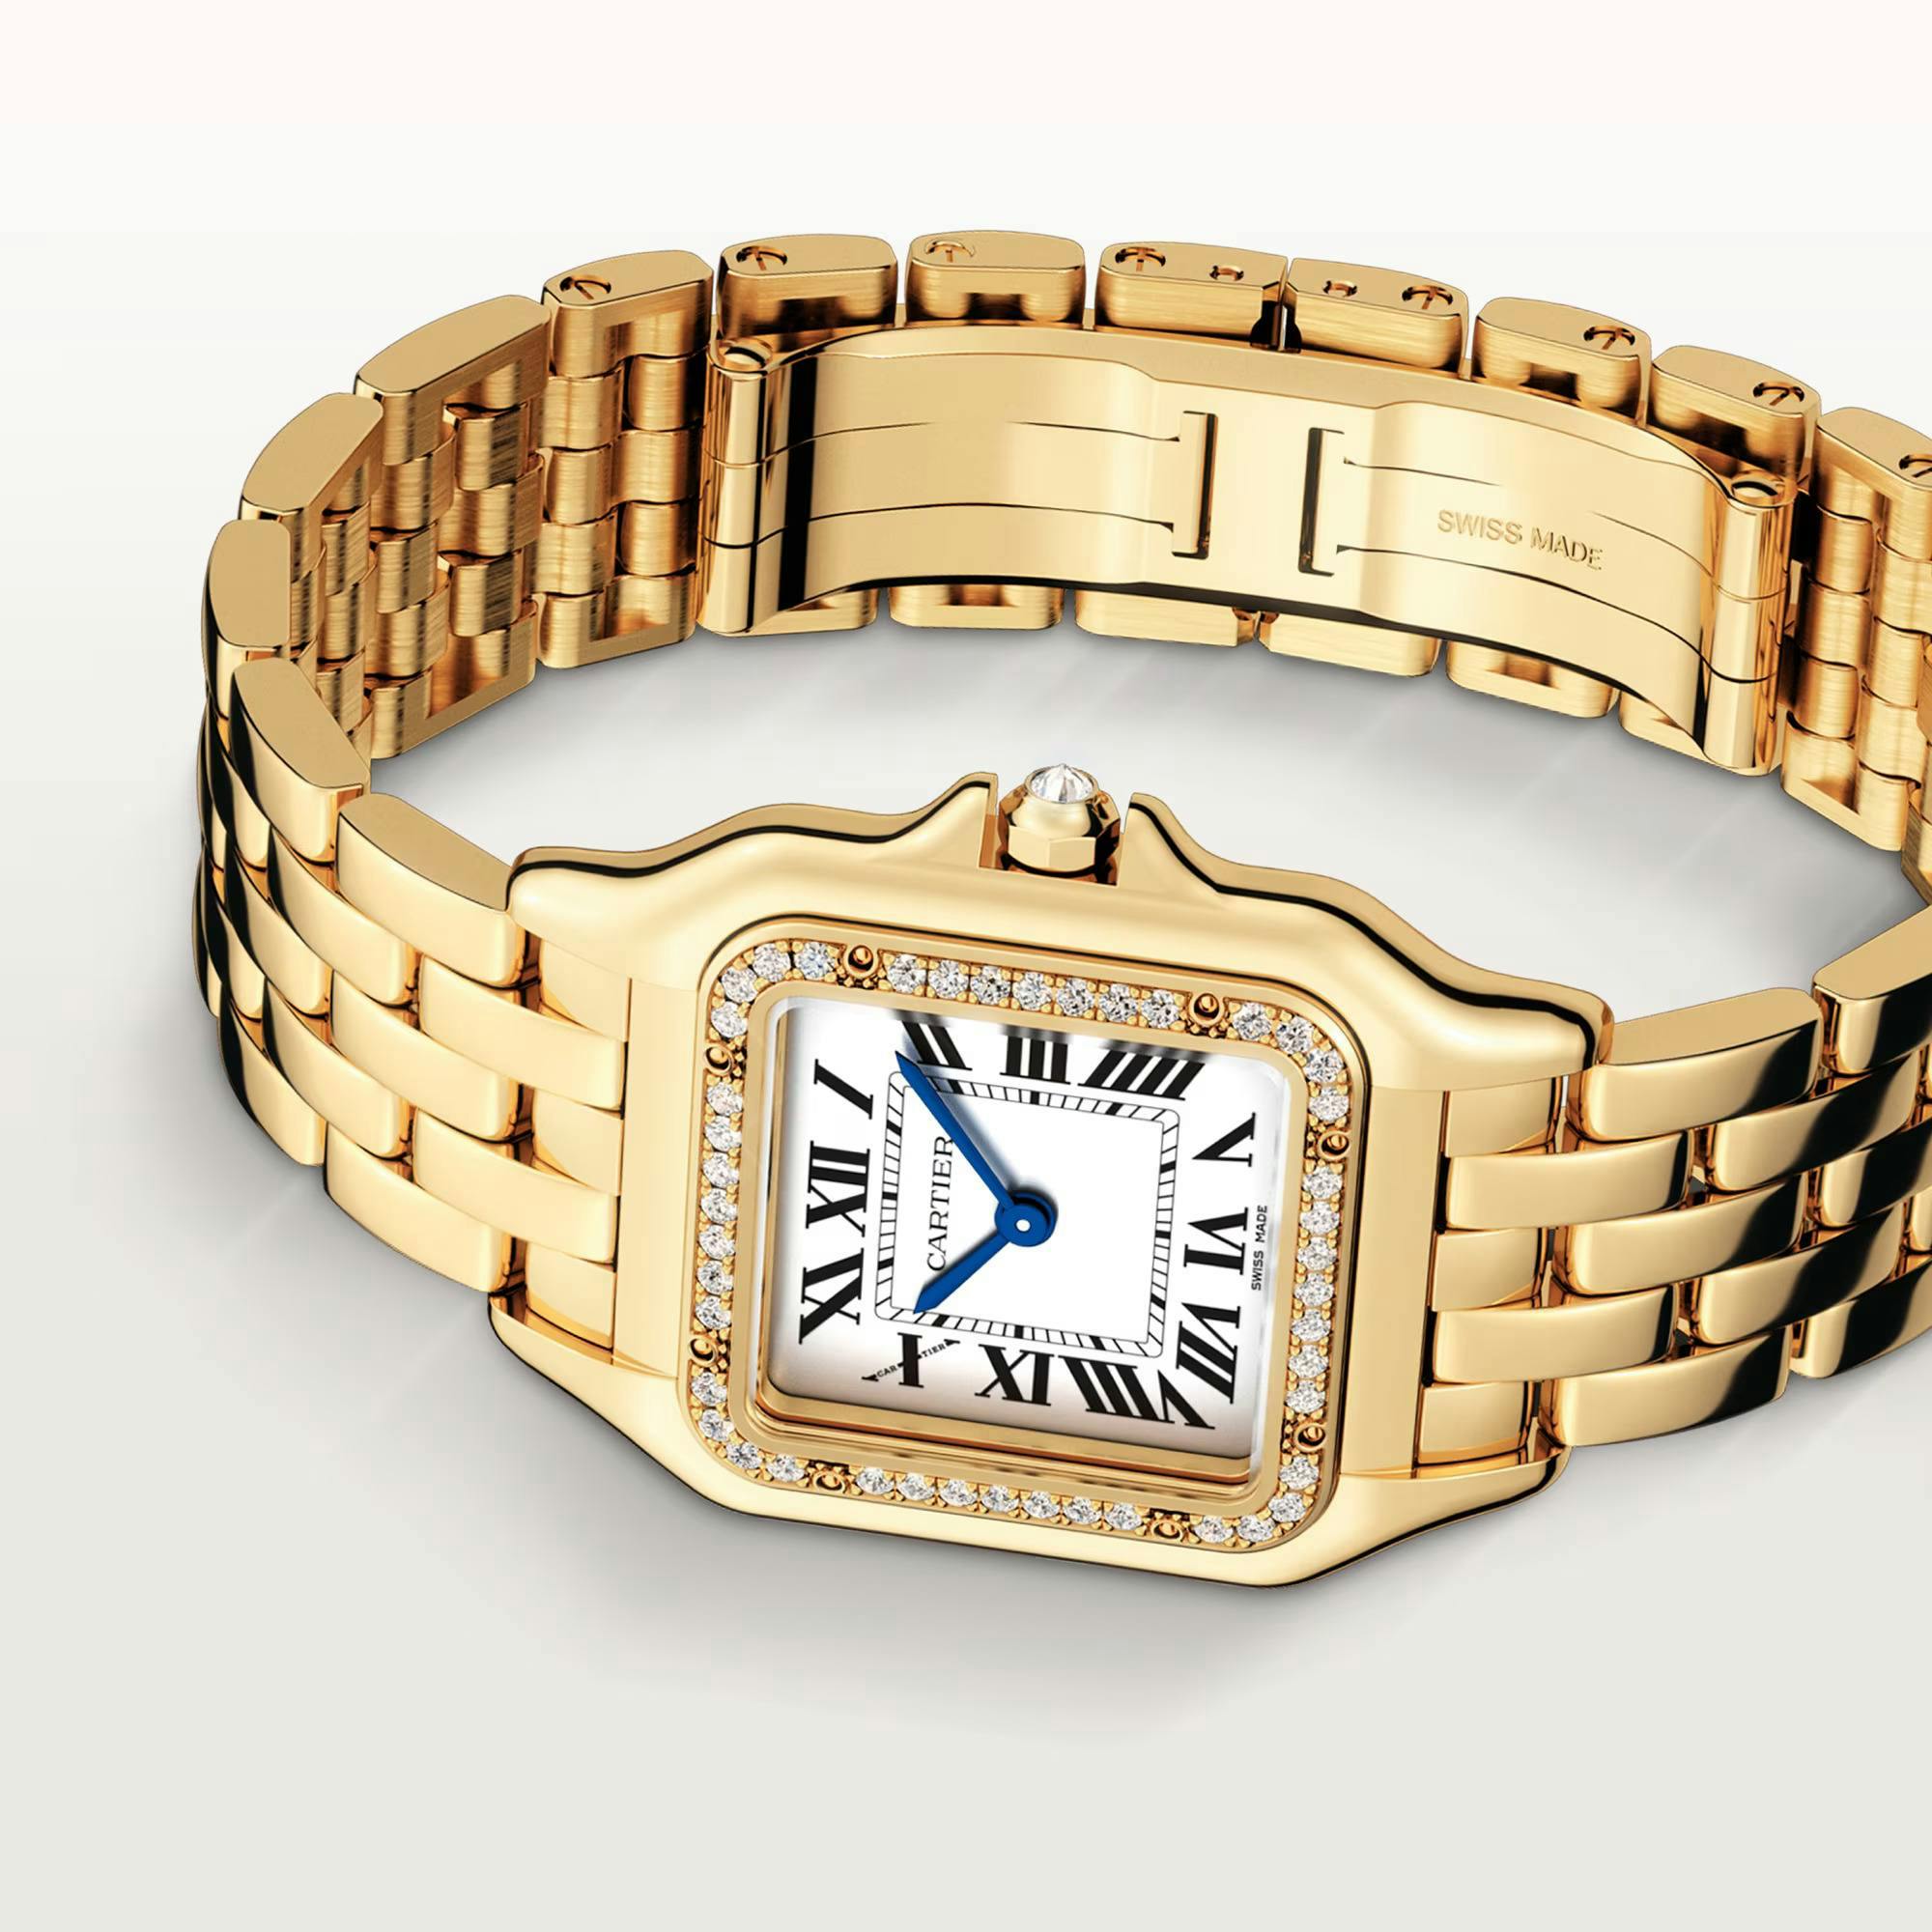 Panthere de Cartier Watch in Yellow Gold with Diamonds, medium model 1